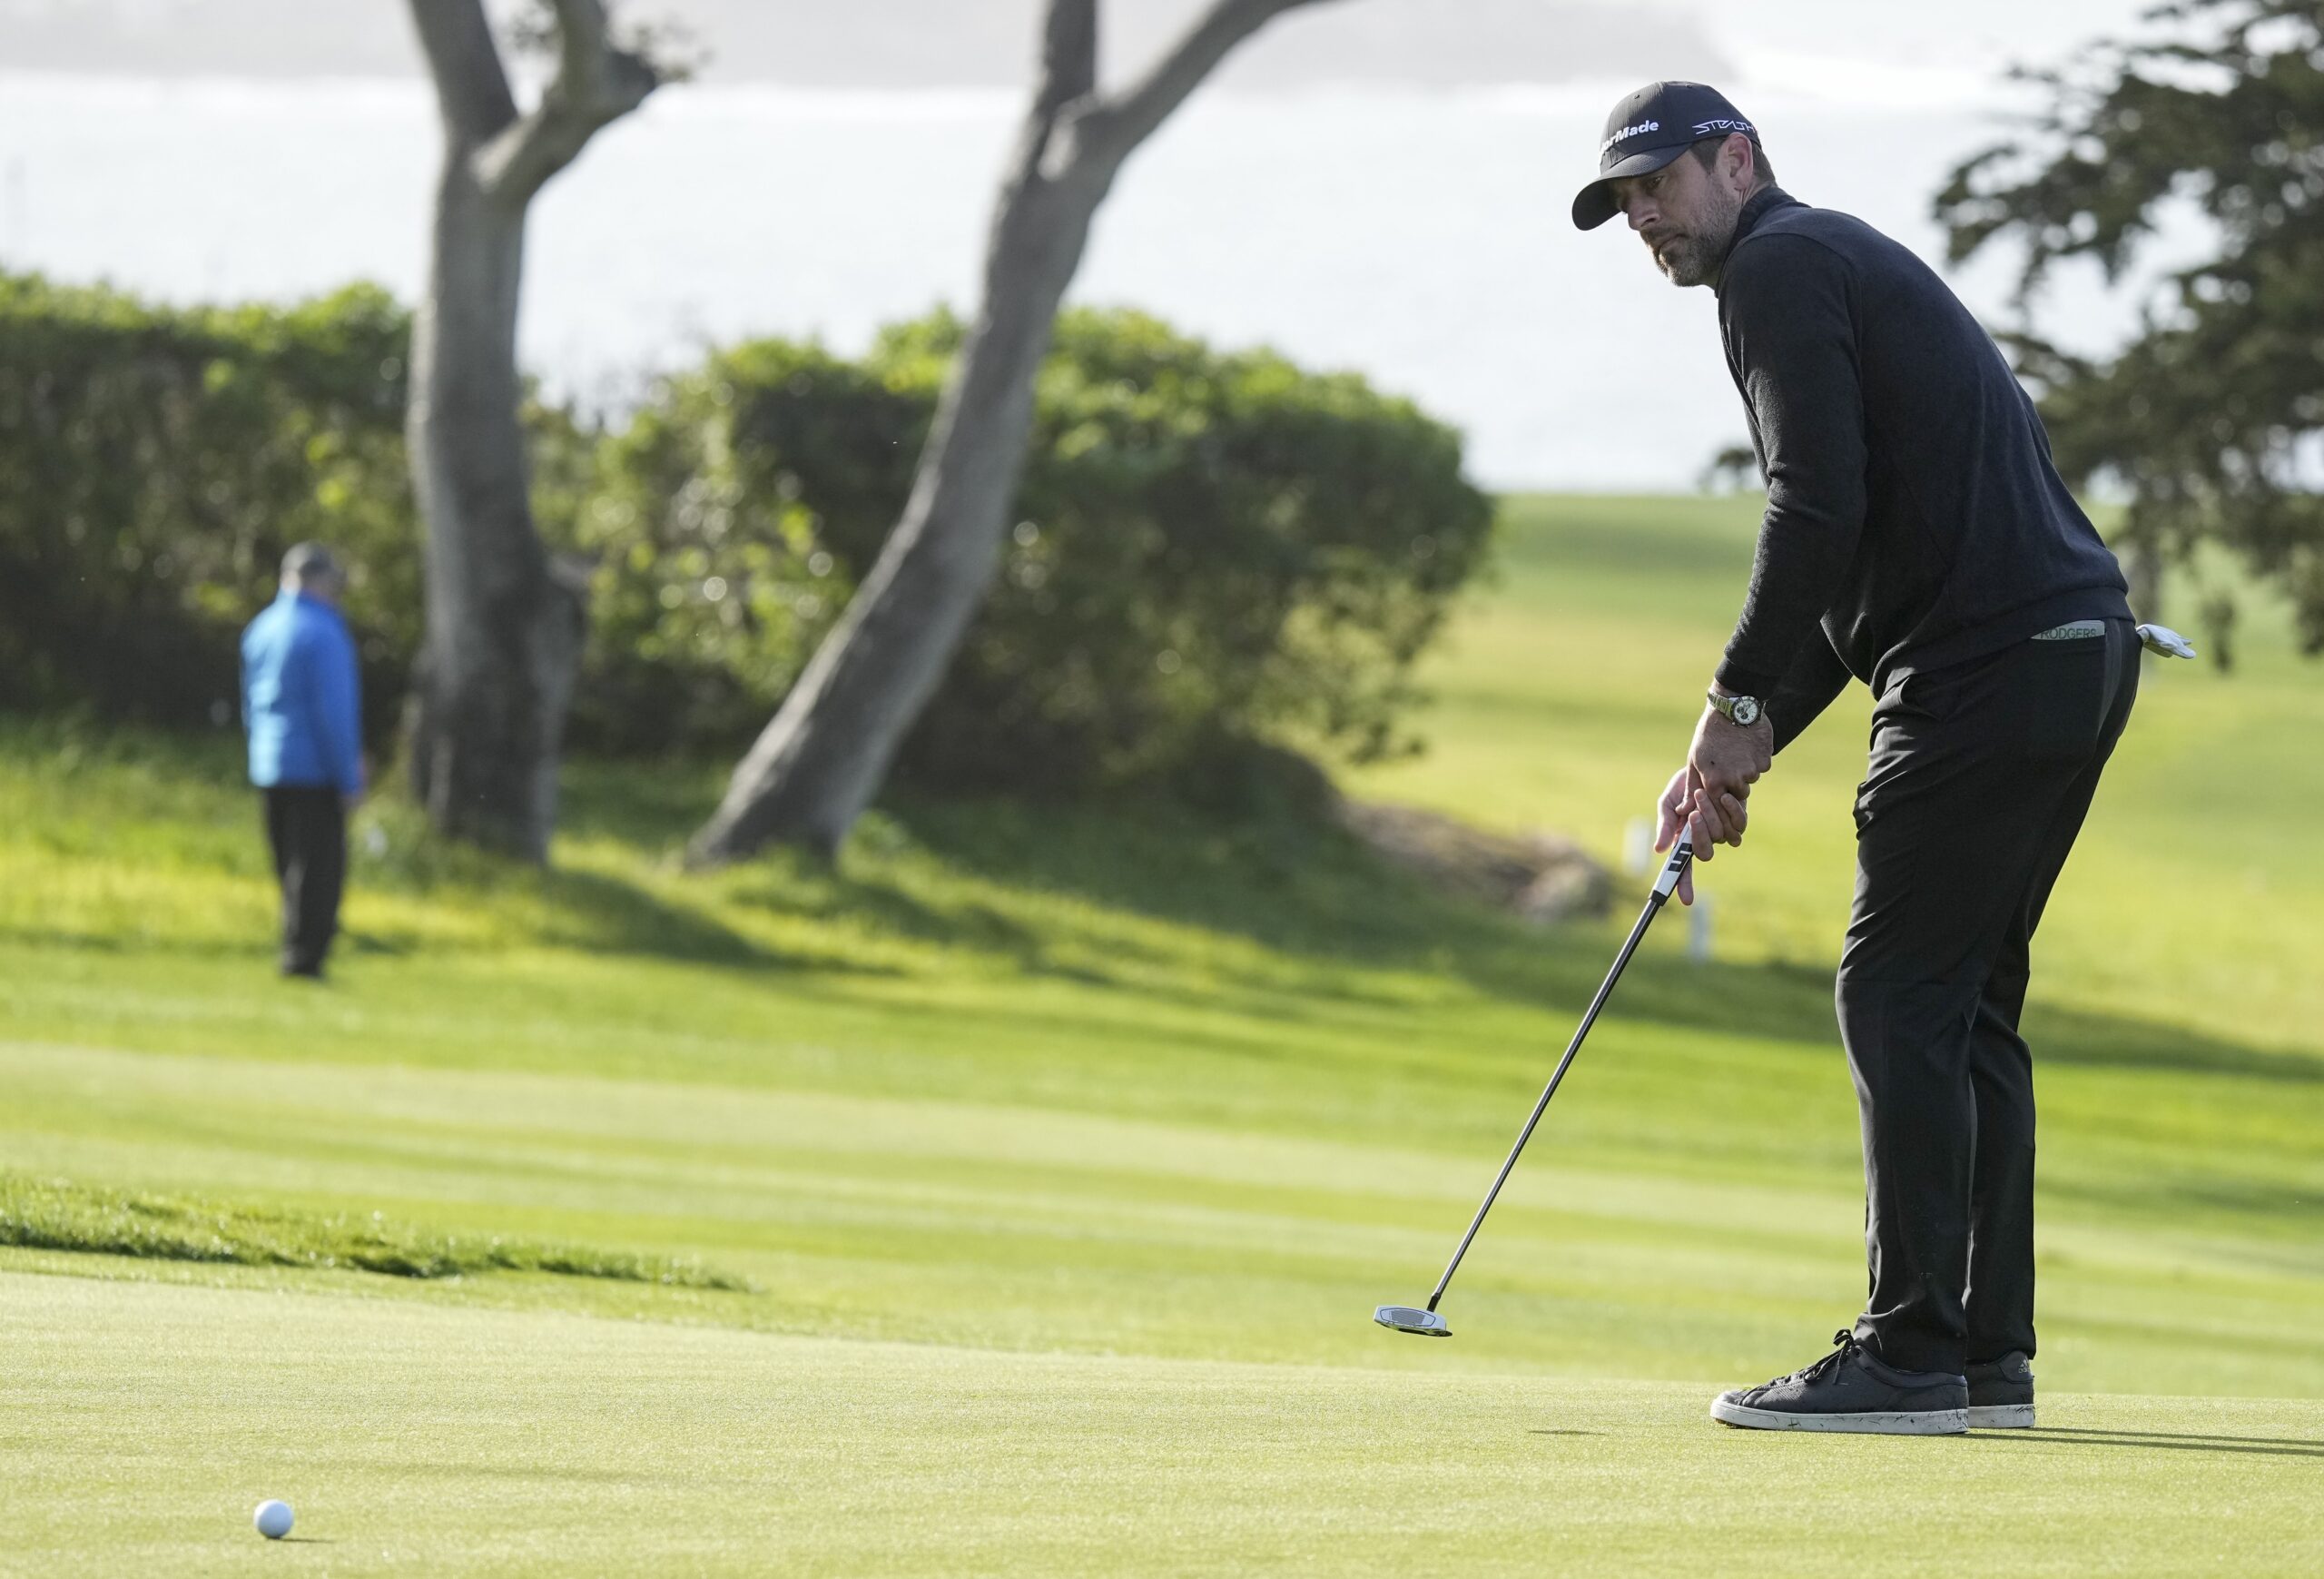 Josh Allen accuses Aaron Rodgers of cheating at the Pebble Beach Pro-Am